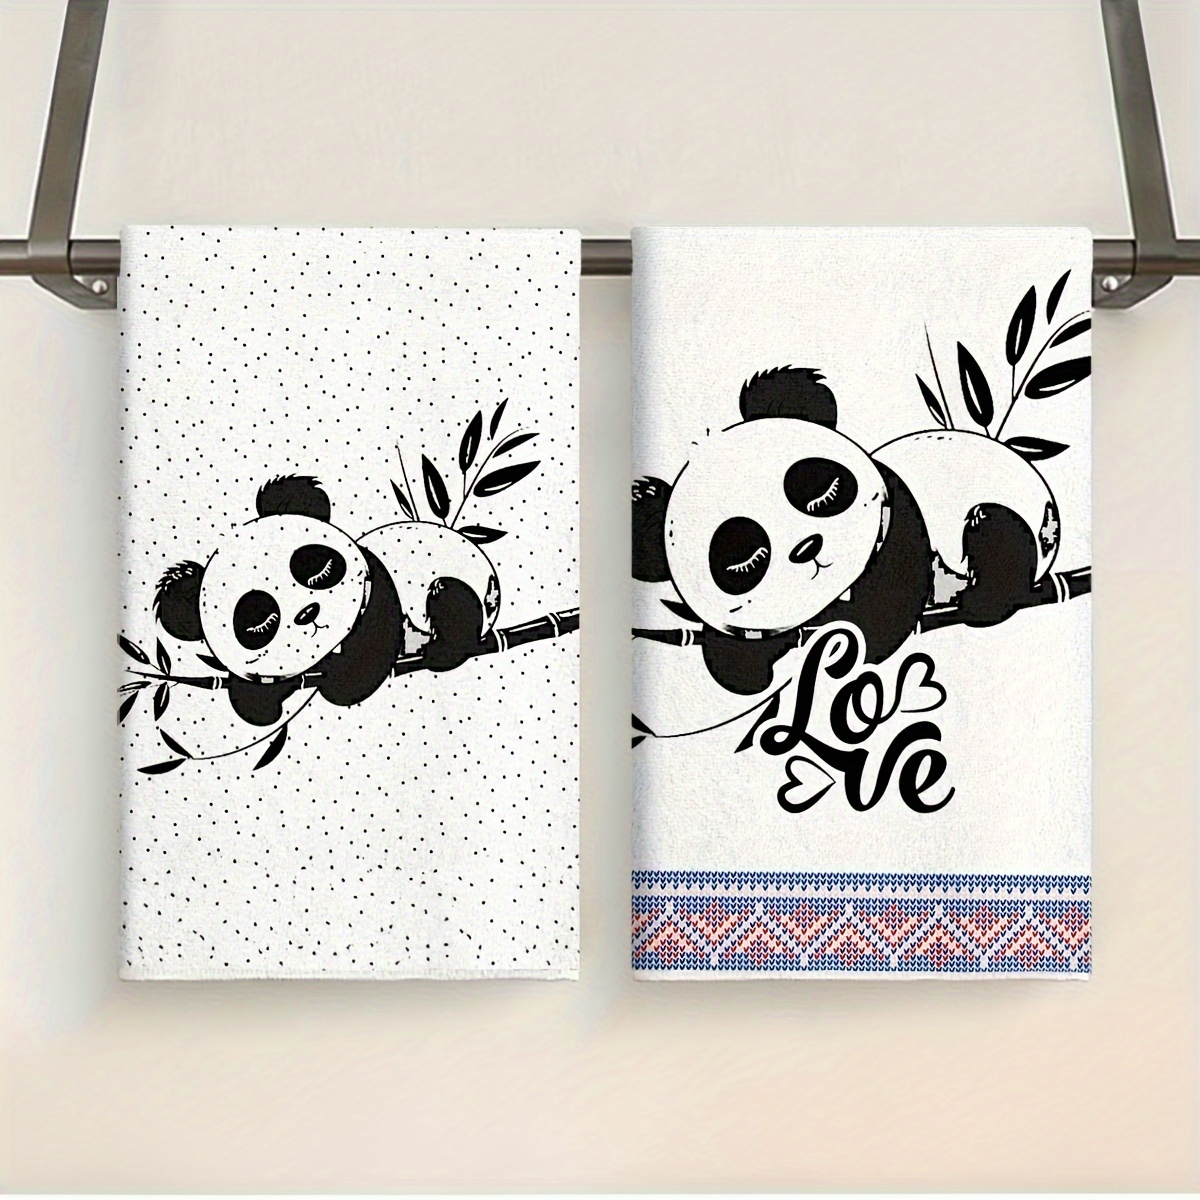 

Modern Microfiber Dish Towels - 2 Pack Cute Panda Animal Design, Absorbent Kitchen Hand Towels, Machine Washable, Ultra-fine Knit Fabric Decorative Towels For Cooking, Baking, Housewarming Gifts